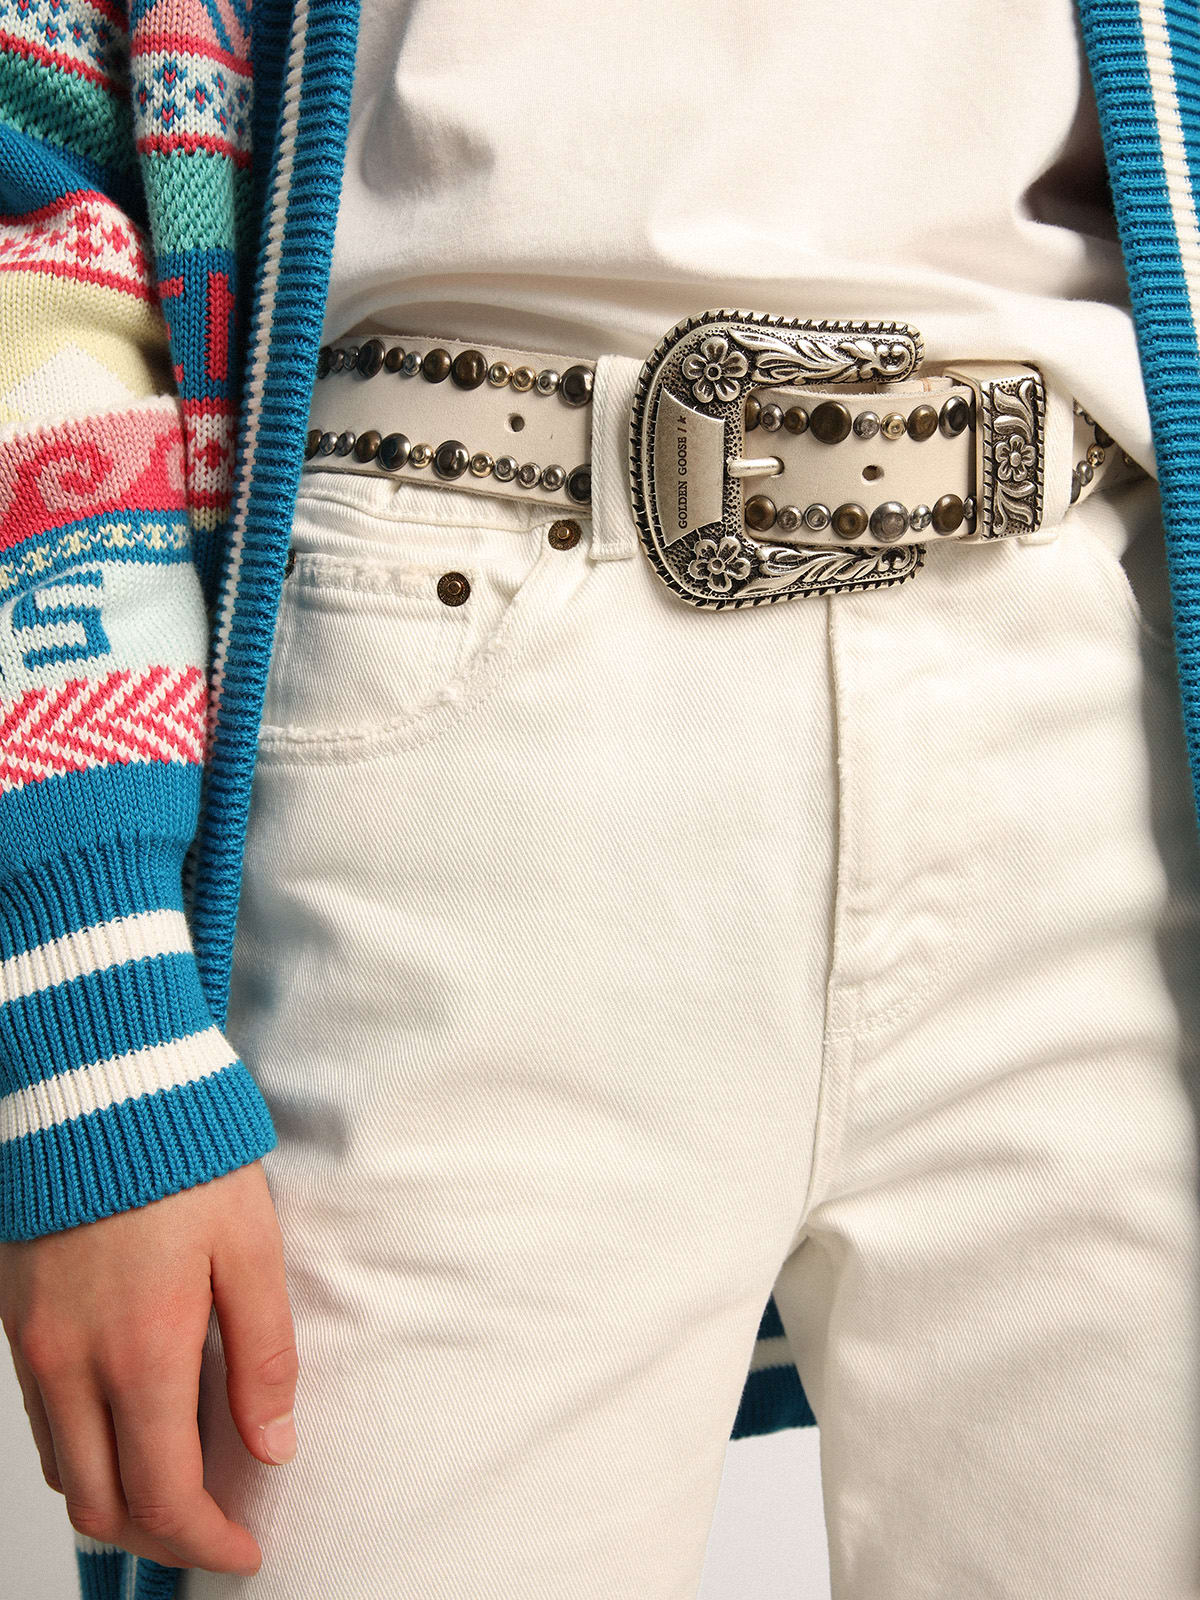 Golden Goose - Women's belt in white leather with colored studs in 